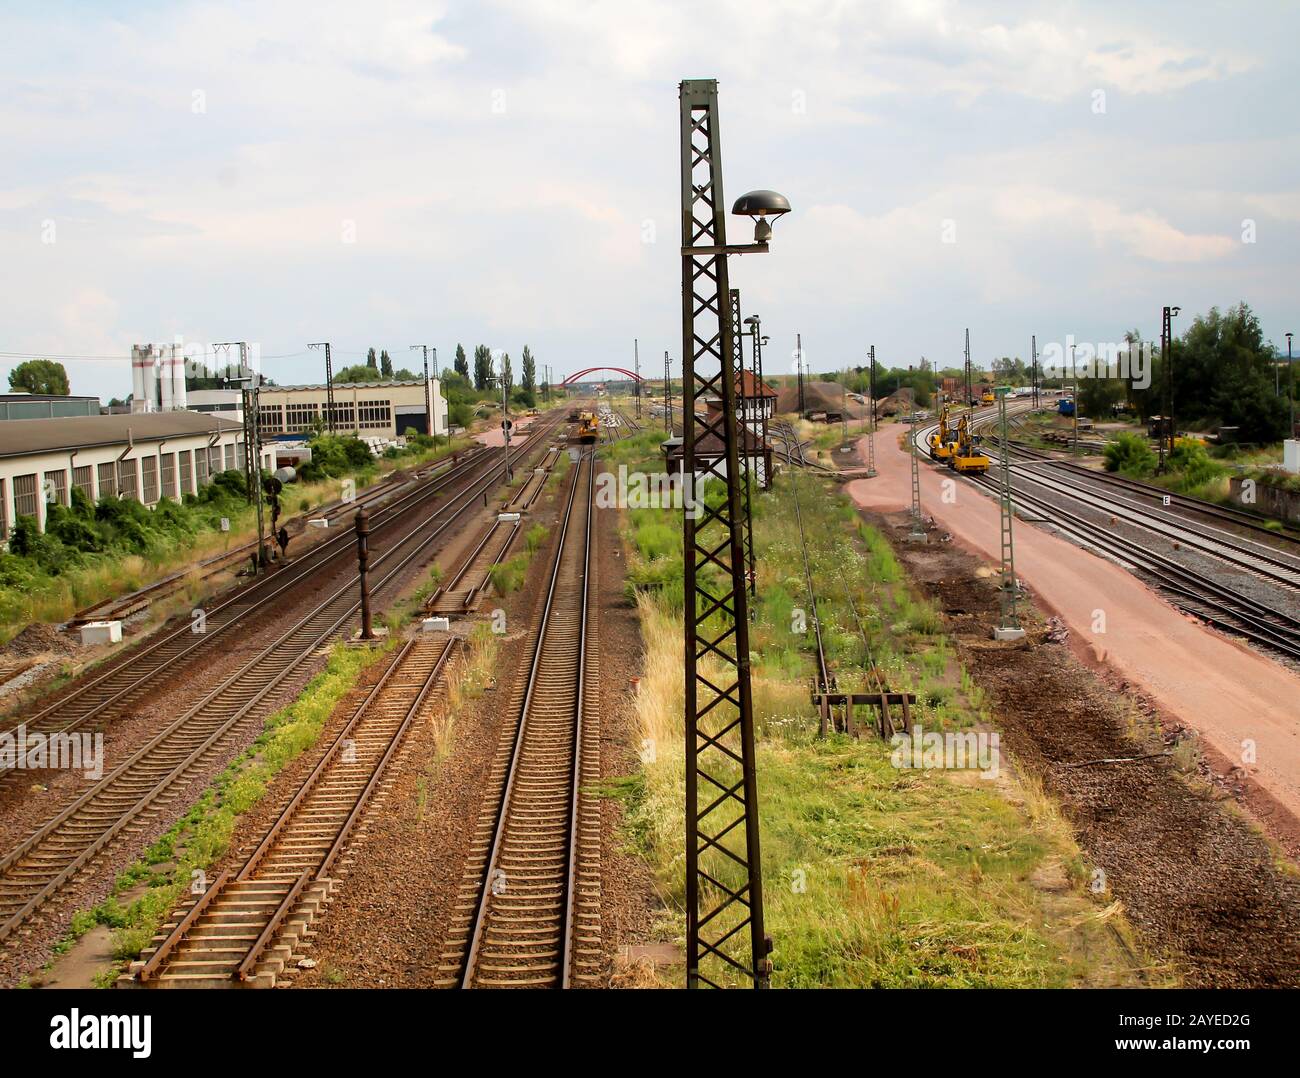 Railway construction site in Köthen, railway tracks are renewed and masts swapped Stock Photo